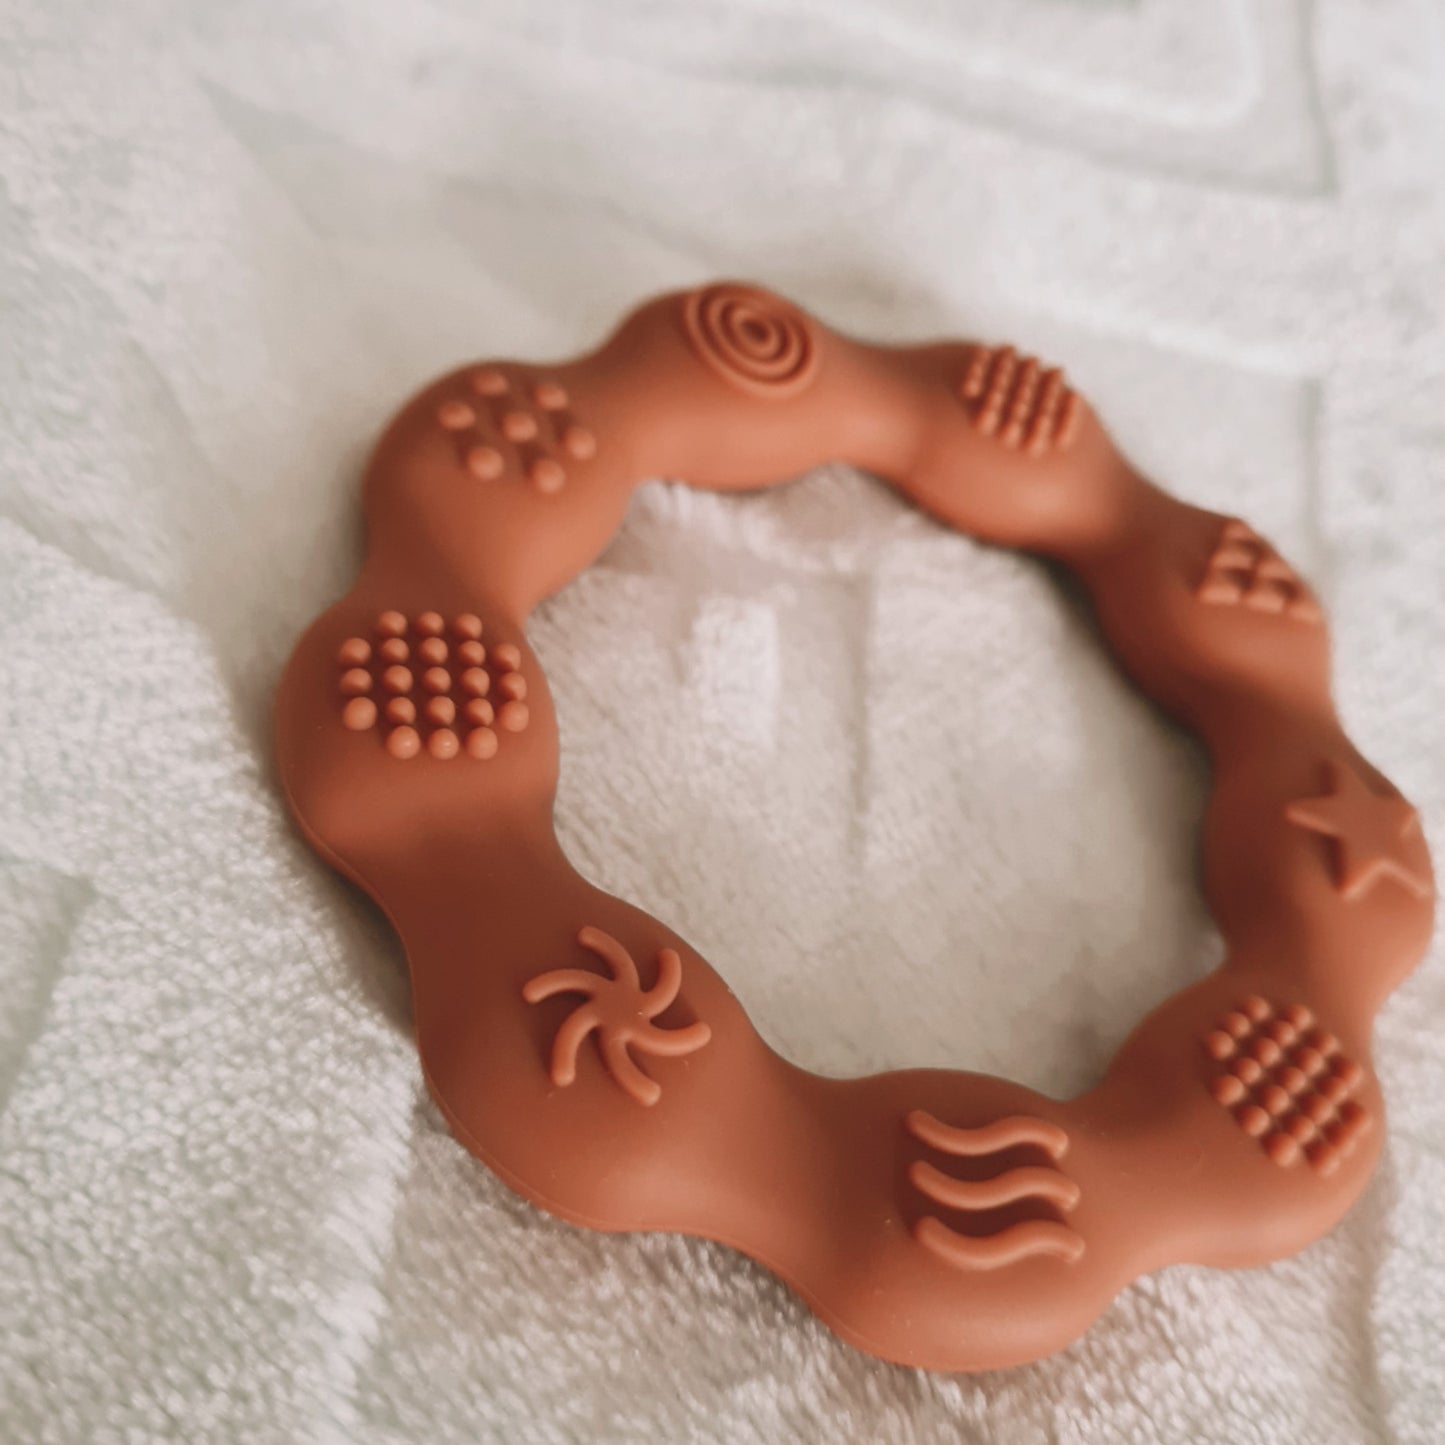 Scilicone teething ring